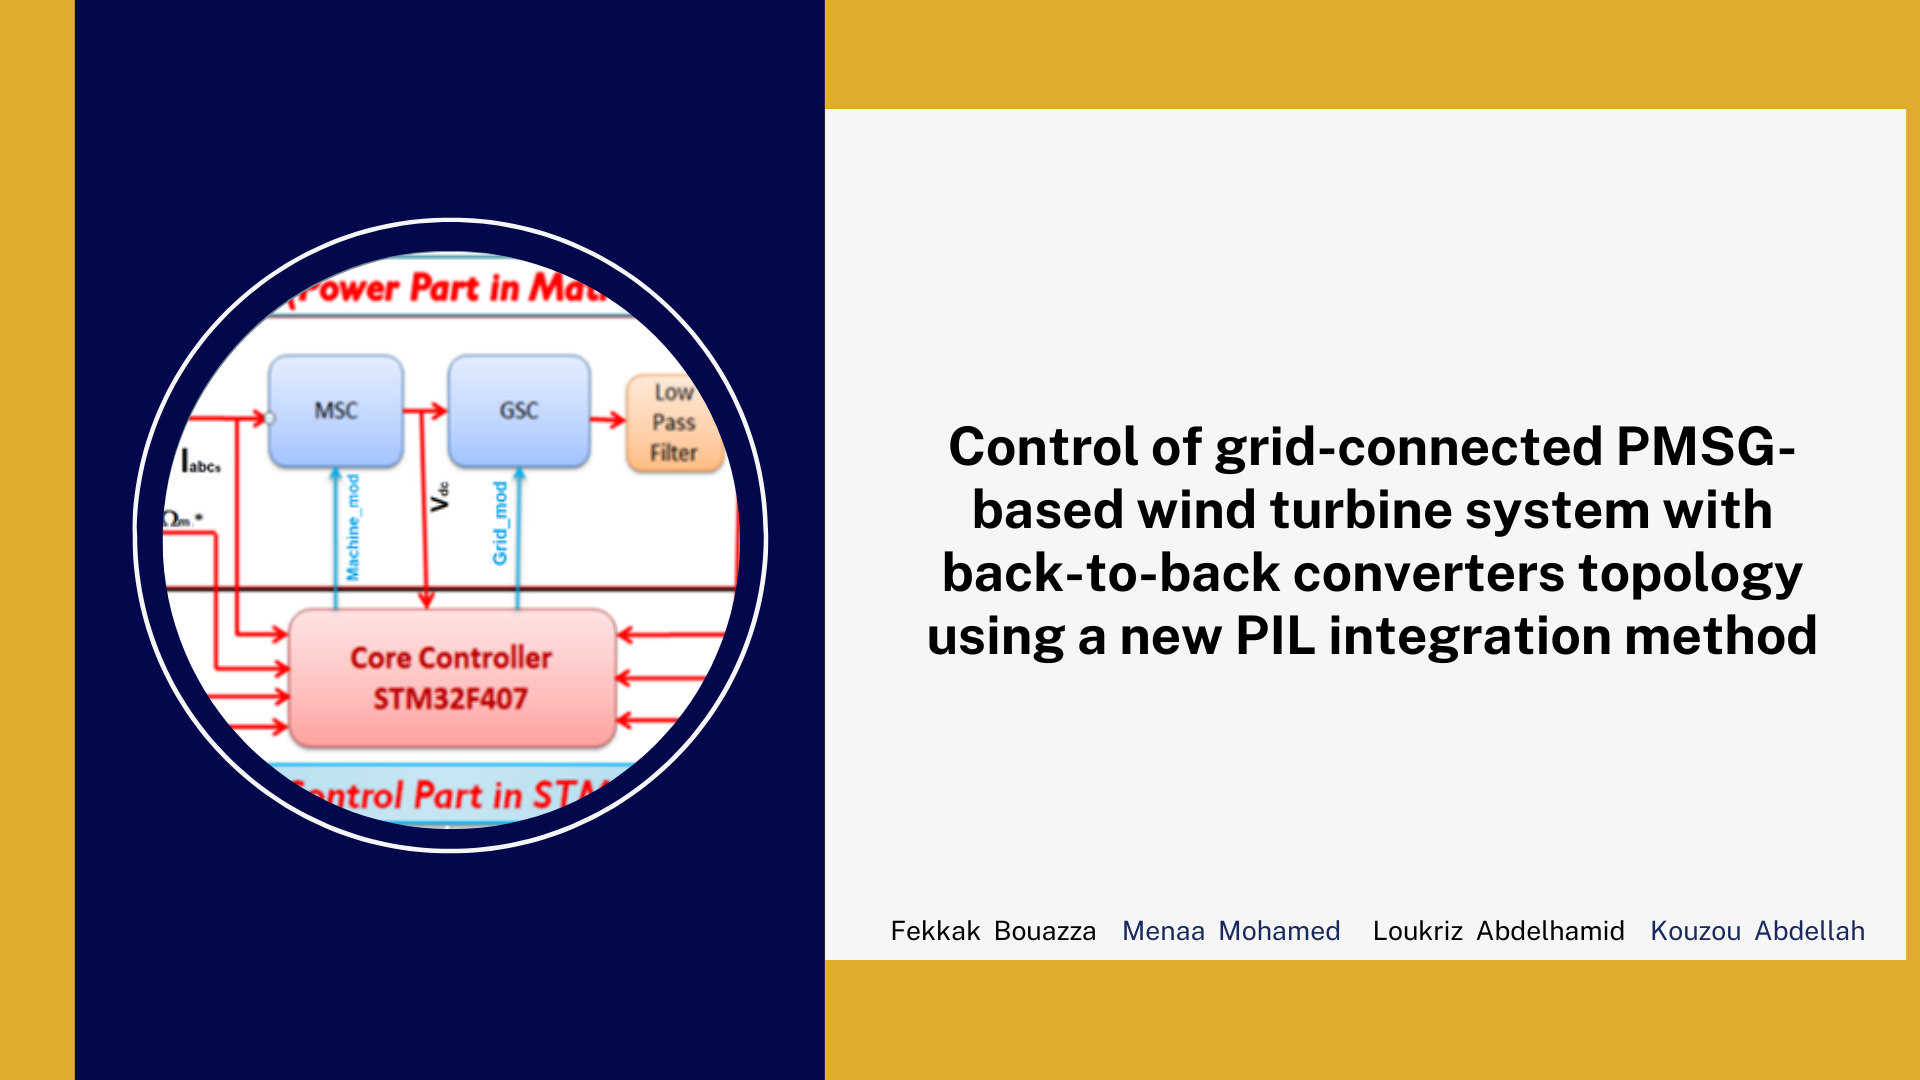 Control of grid-connected PMSG-based wind turbine system with back-to-back converters topology using a new PIL integration method